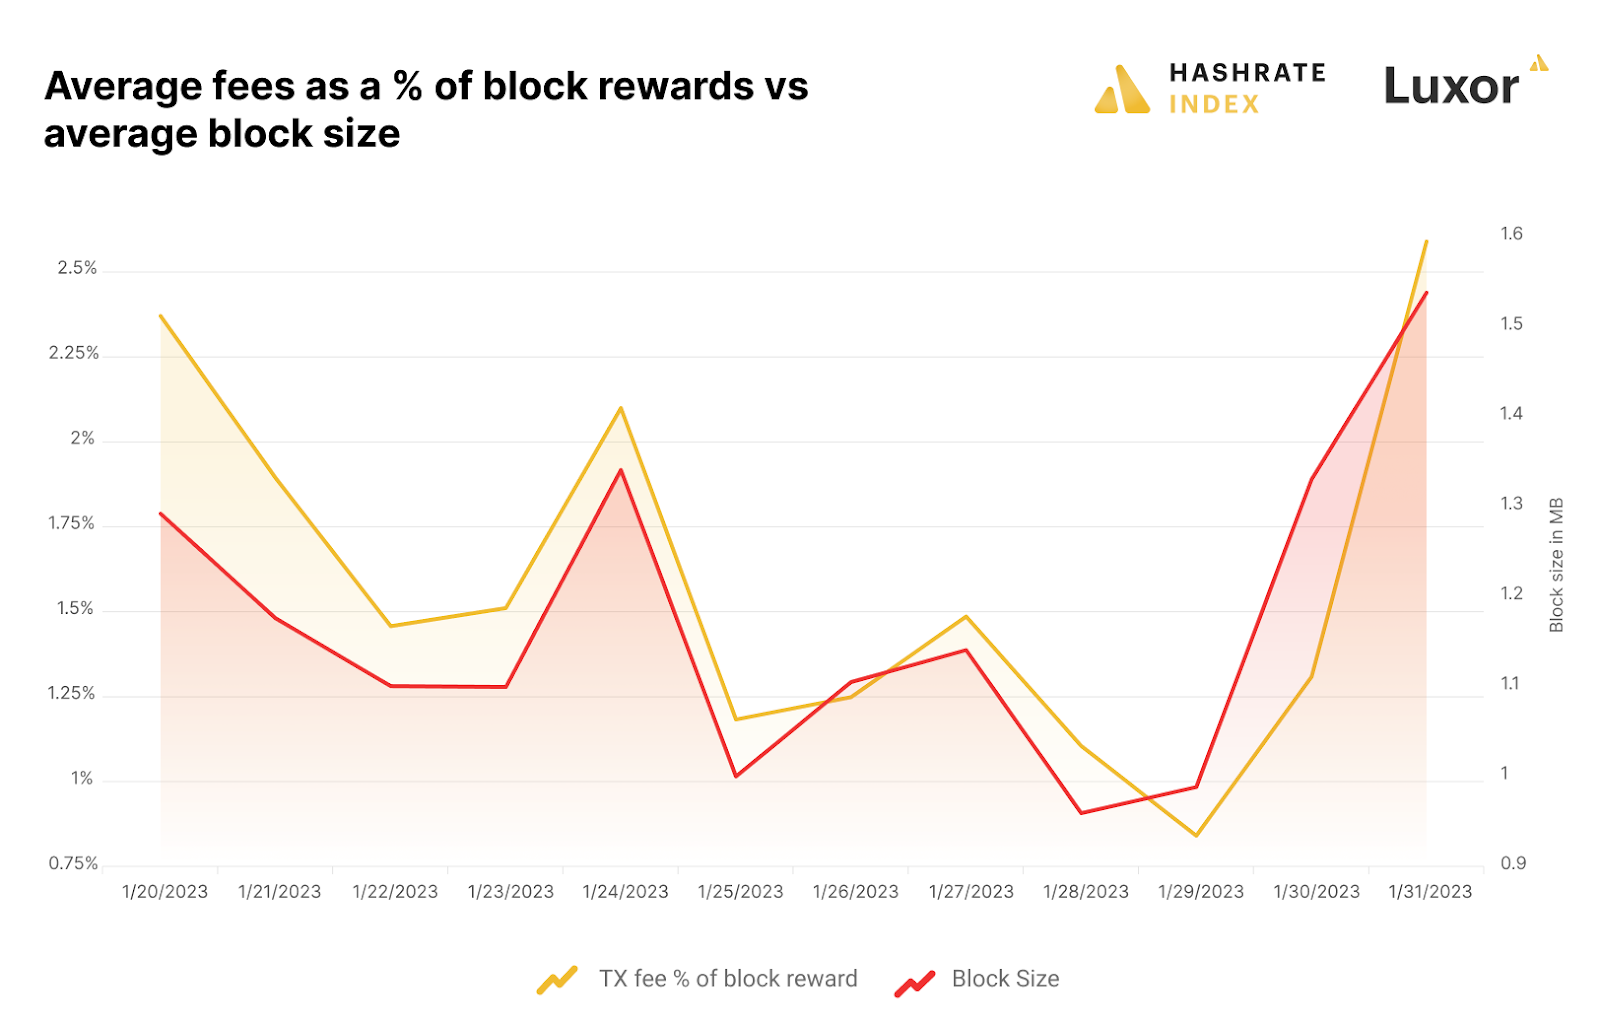 It's nothing astronomical, but ordinal NFTs have made some impact on blocksize and transaction fees. Source: Hashrate Index